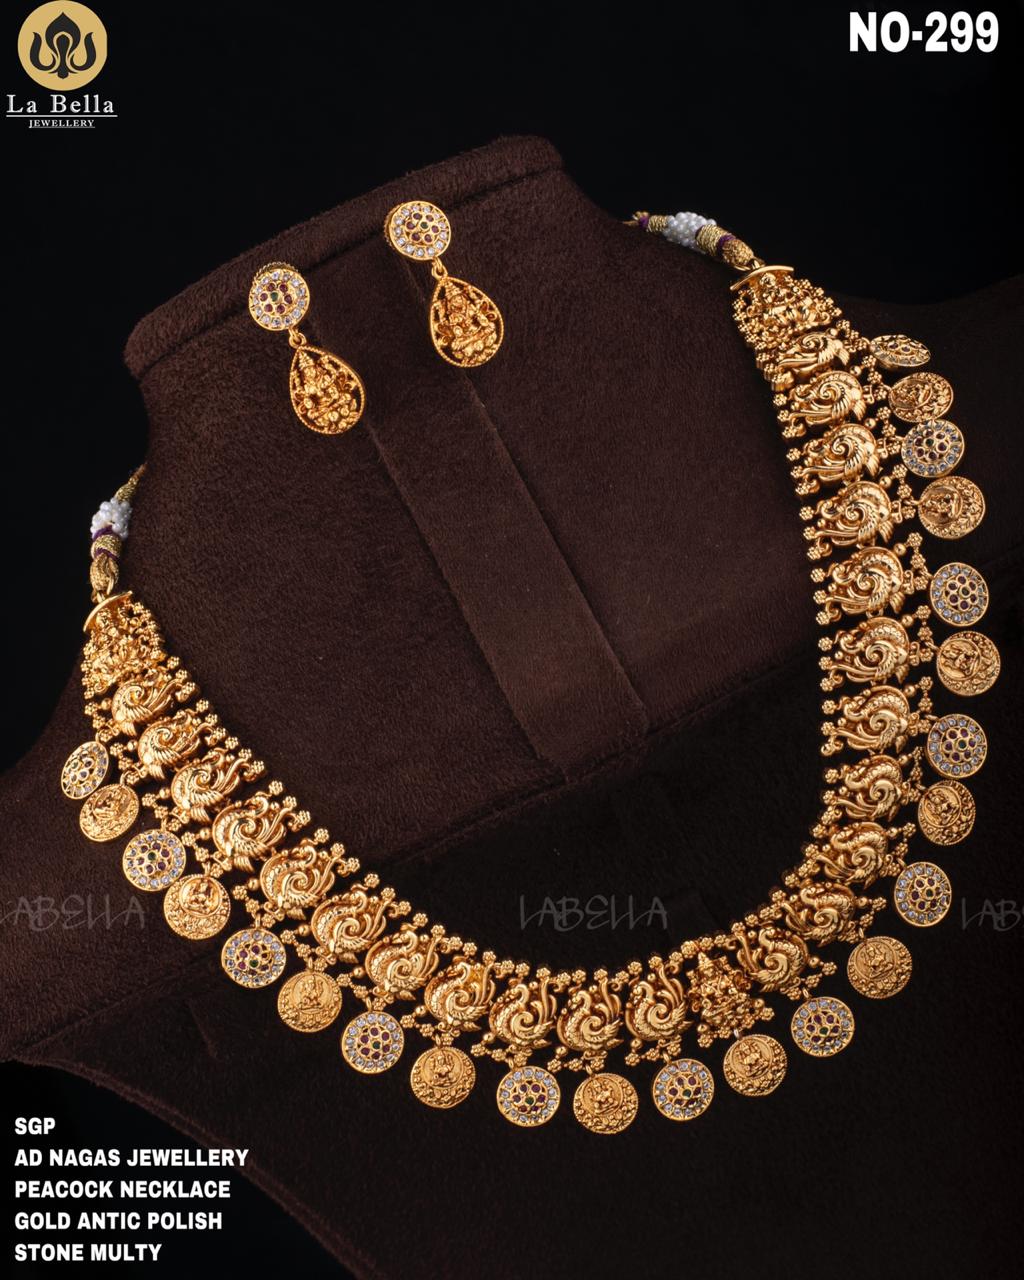 New Diwali Collection 2020 - Indian Jewelry Designs